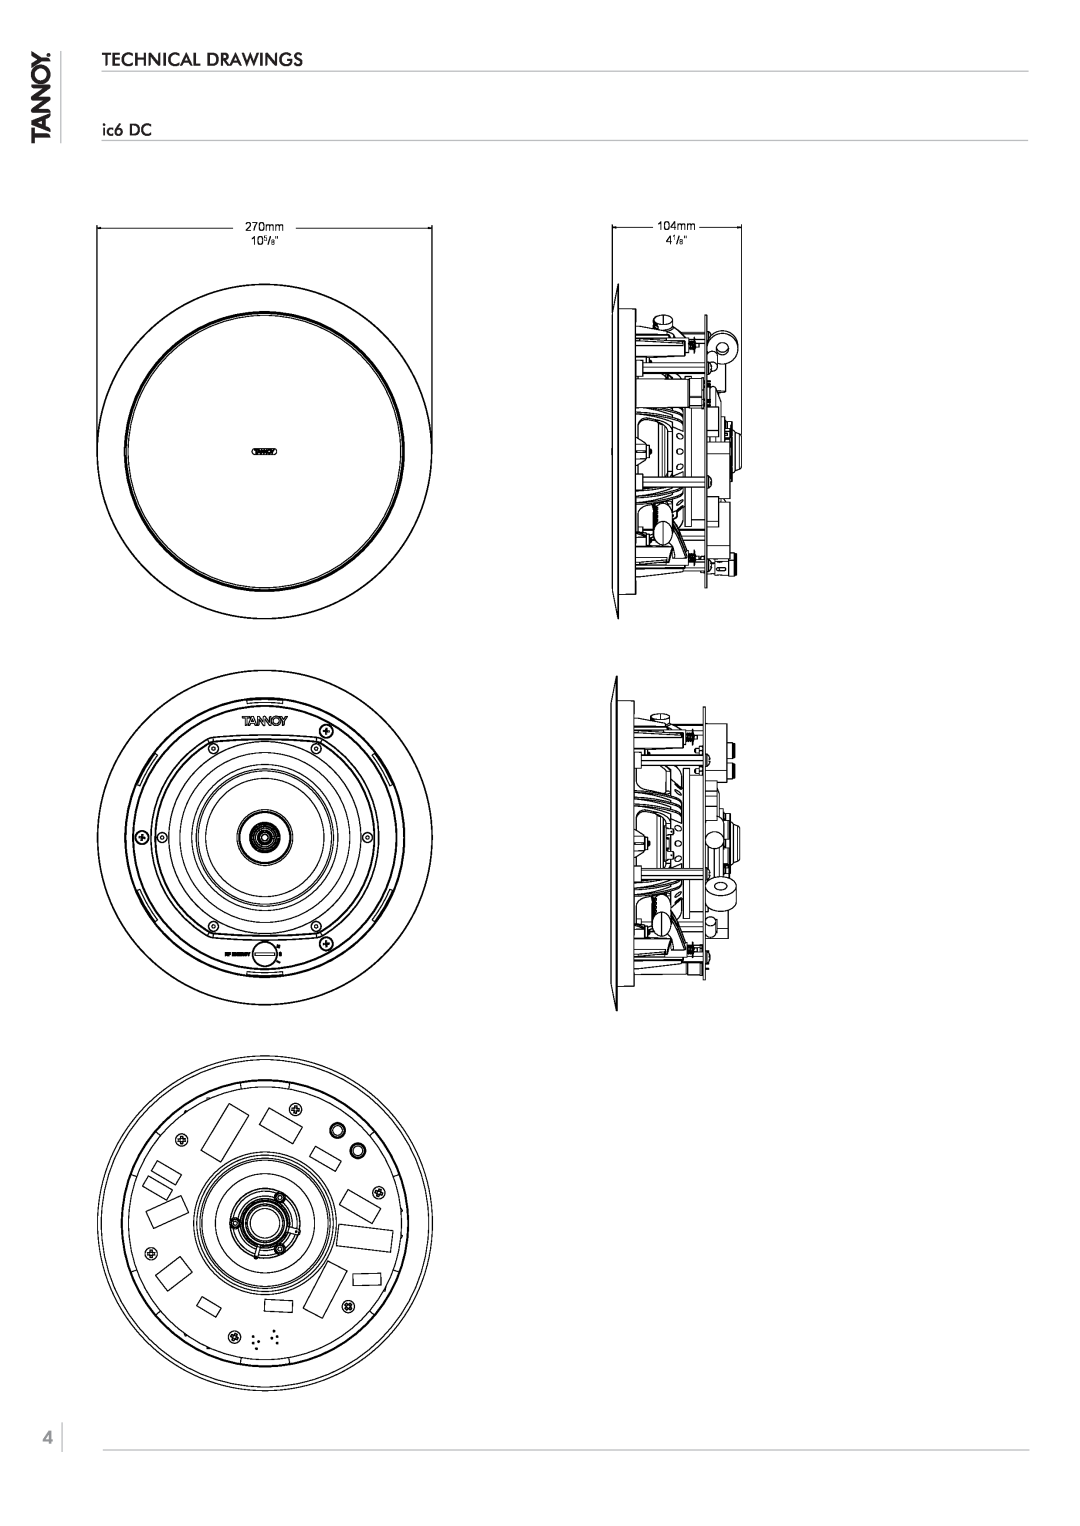 Tannoy ic6 DC owner manual Technical Drawings, 270mm 105/8”, 104mm, 41/8” 